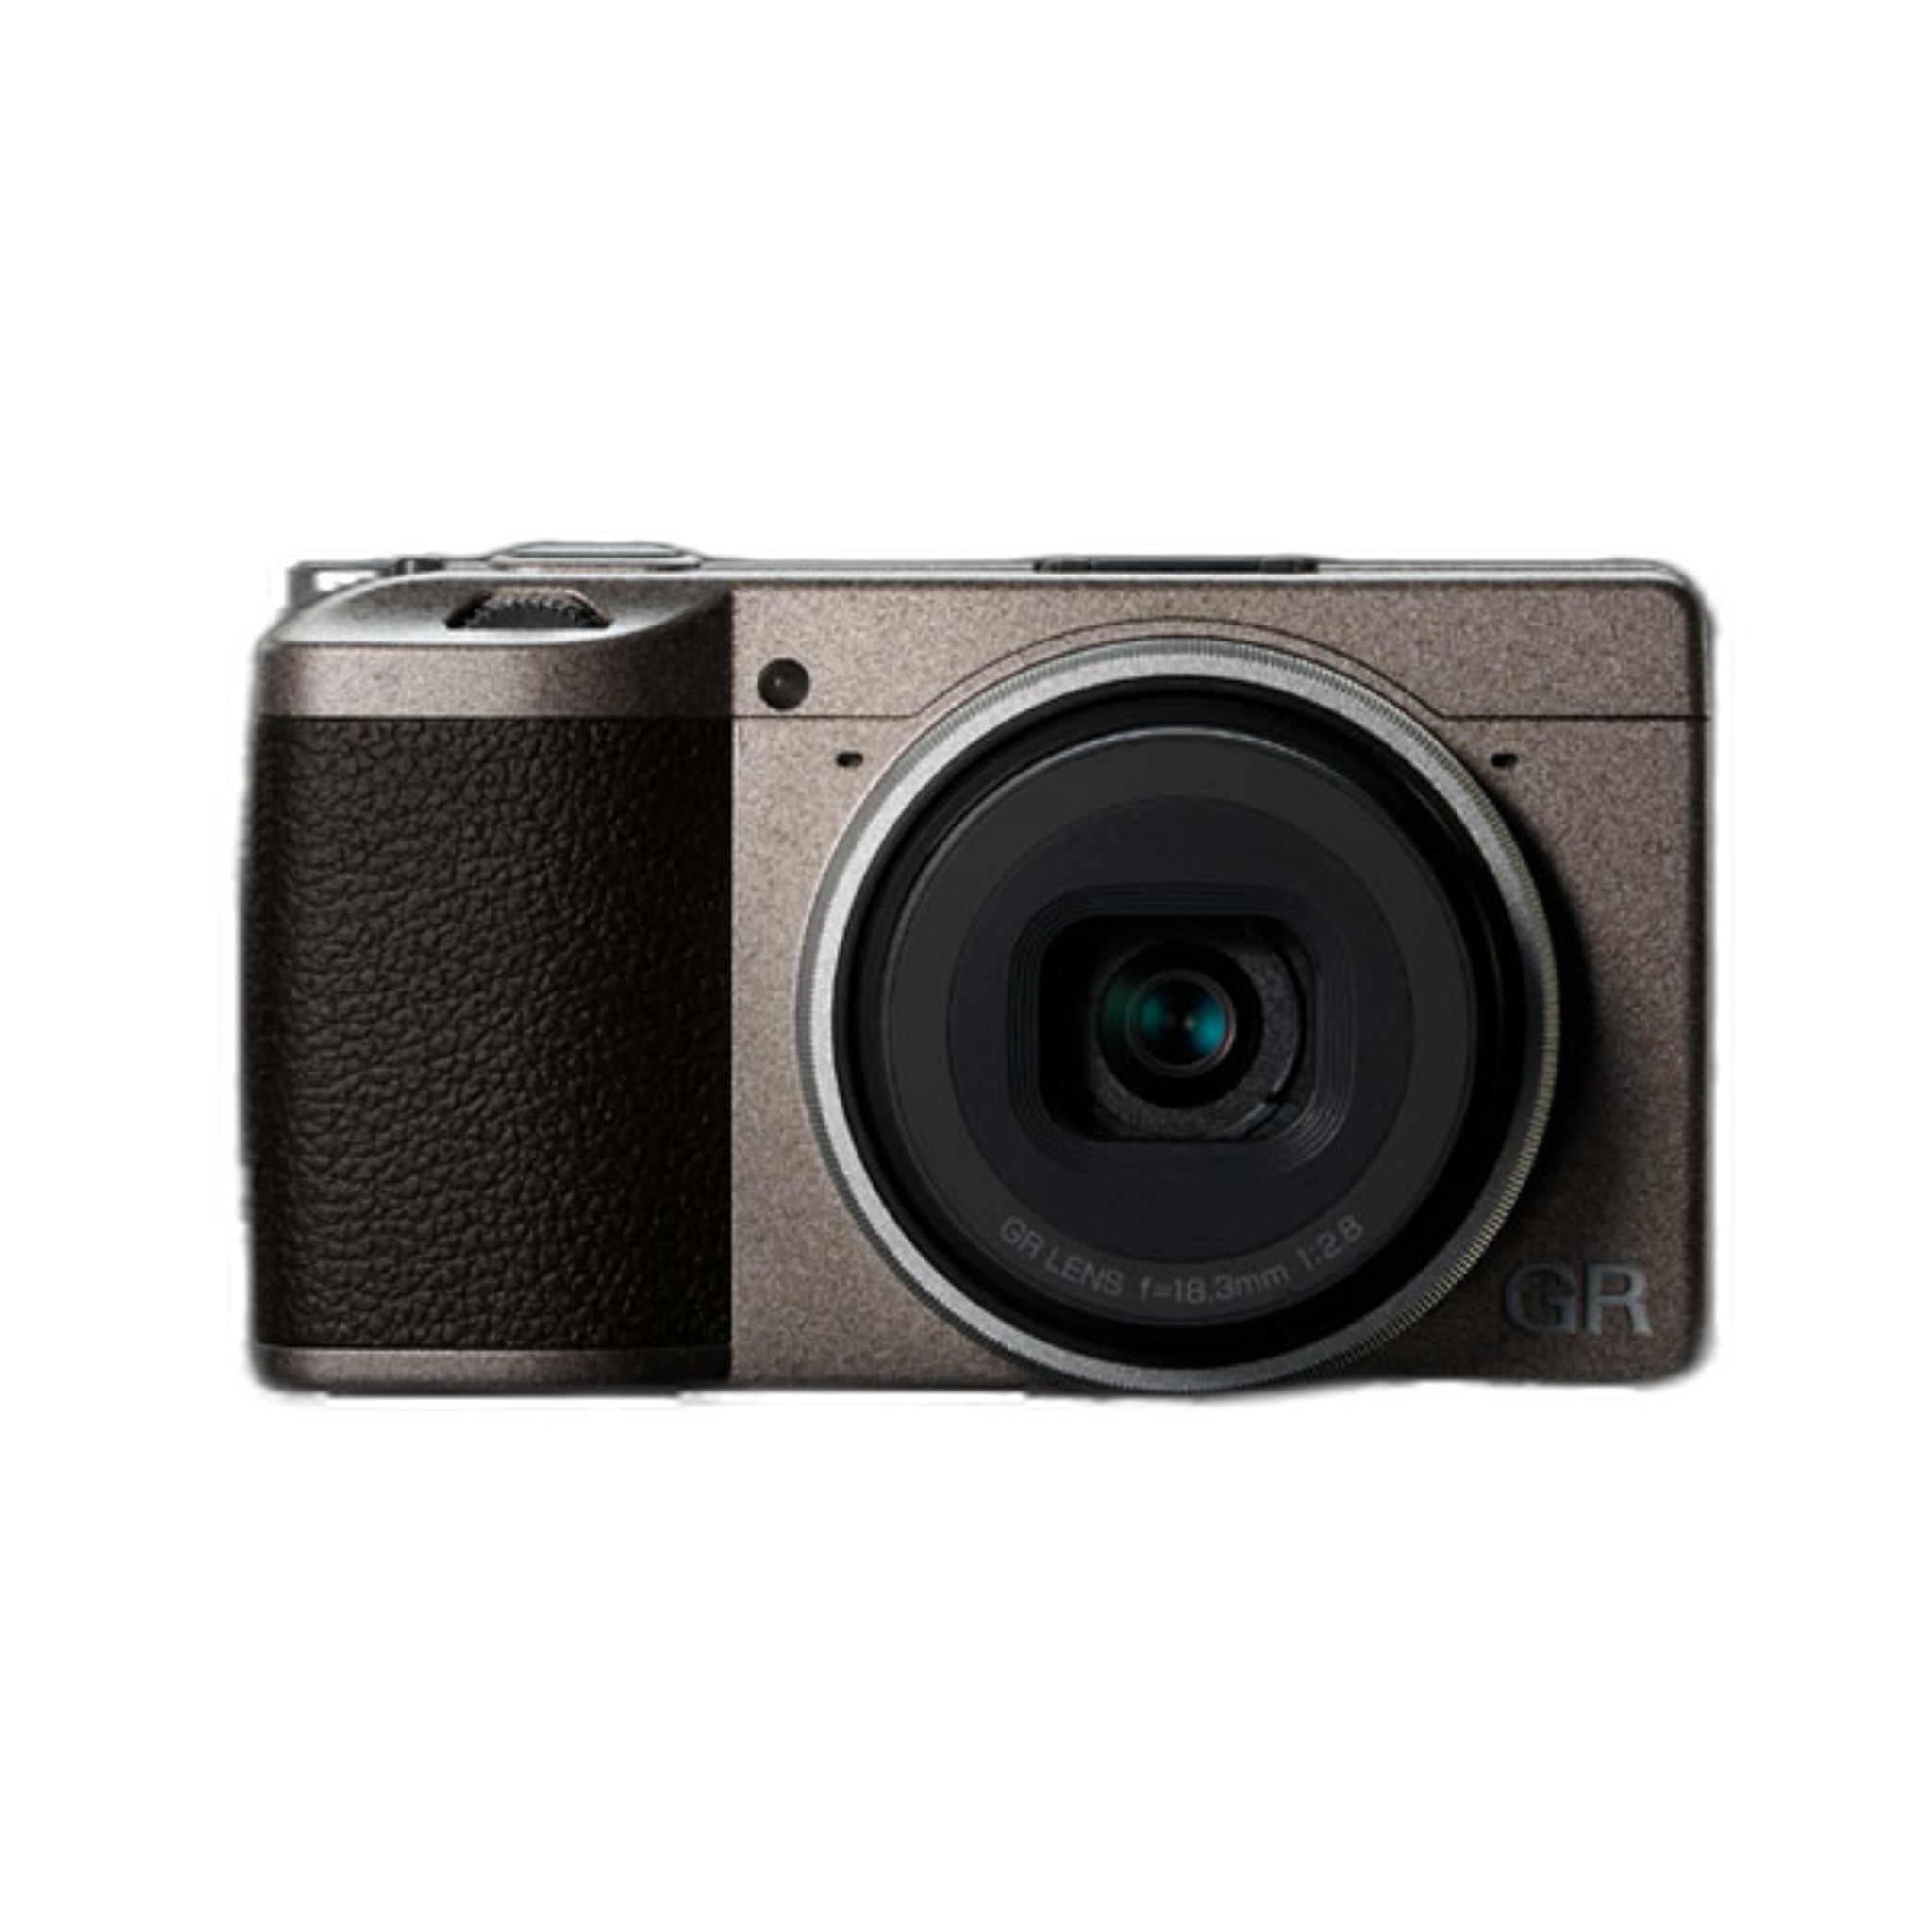 Ricoh GR III Diary Edition Special Limited Kit (Limited 2,000 units Worldwide)-Digital Compact Cameras-futuromic